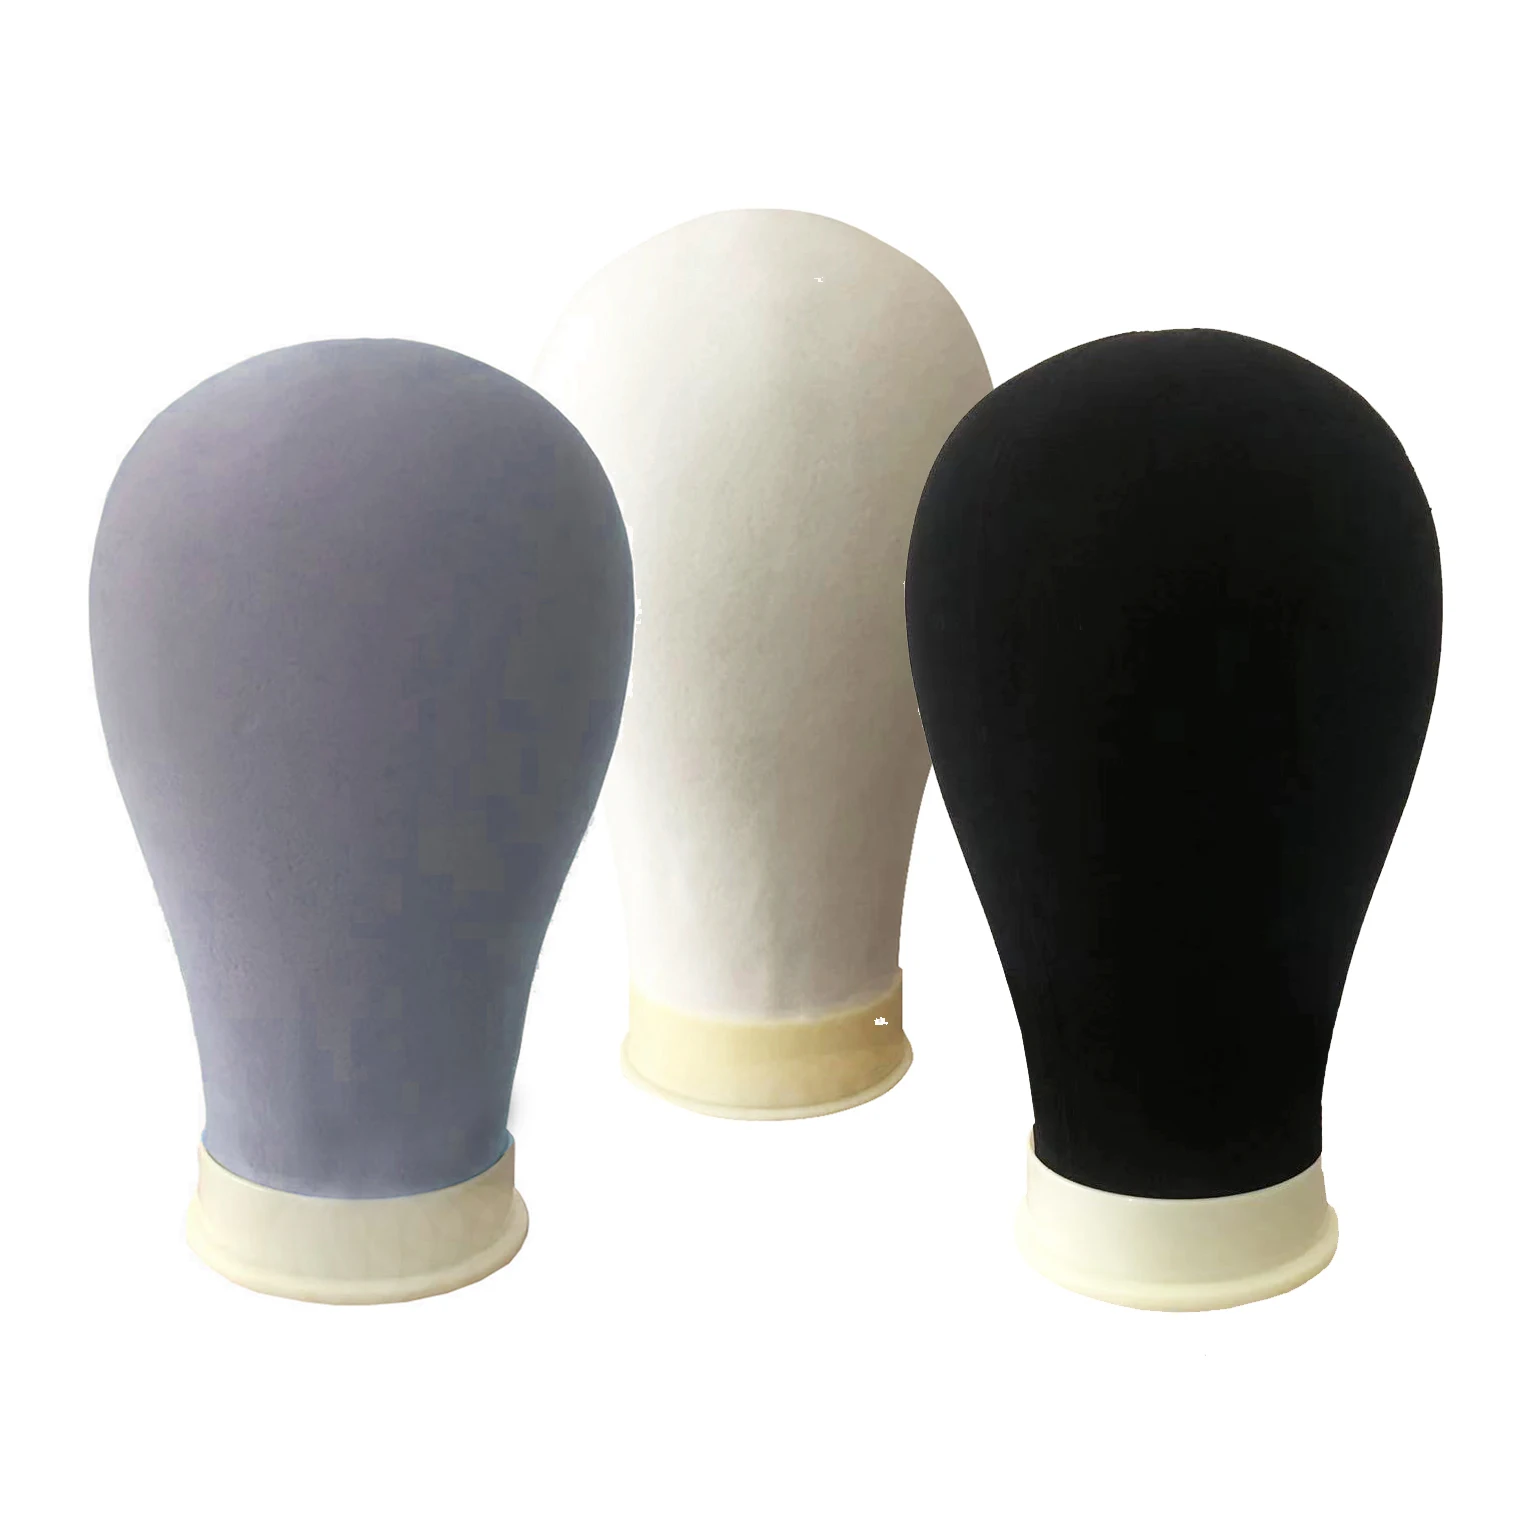 Wholesale Colorful Velvet Covered Foam Head Display Mannequin Head for Wig